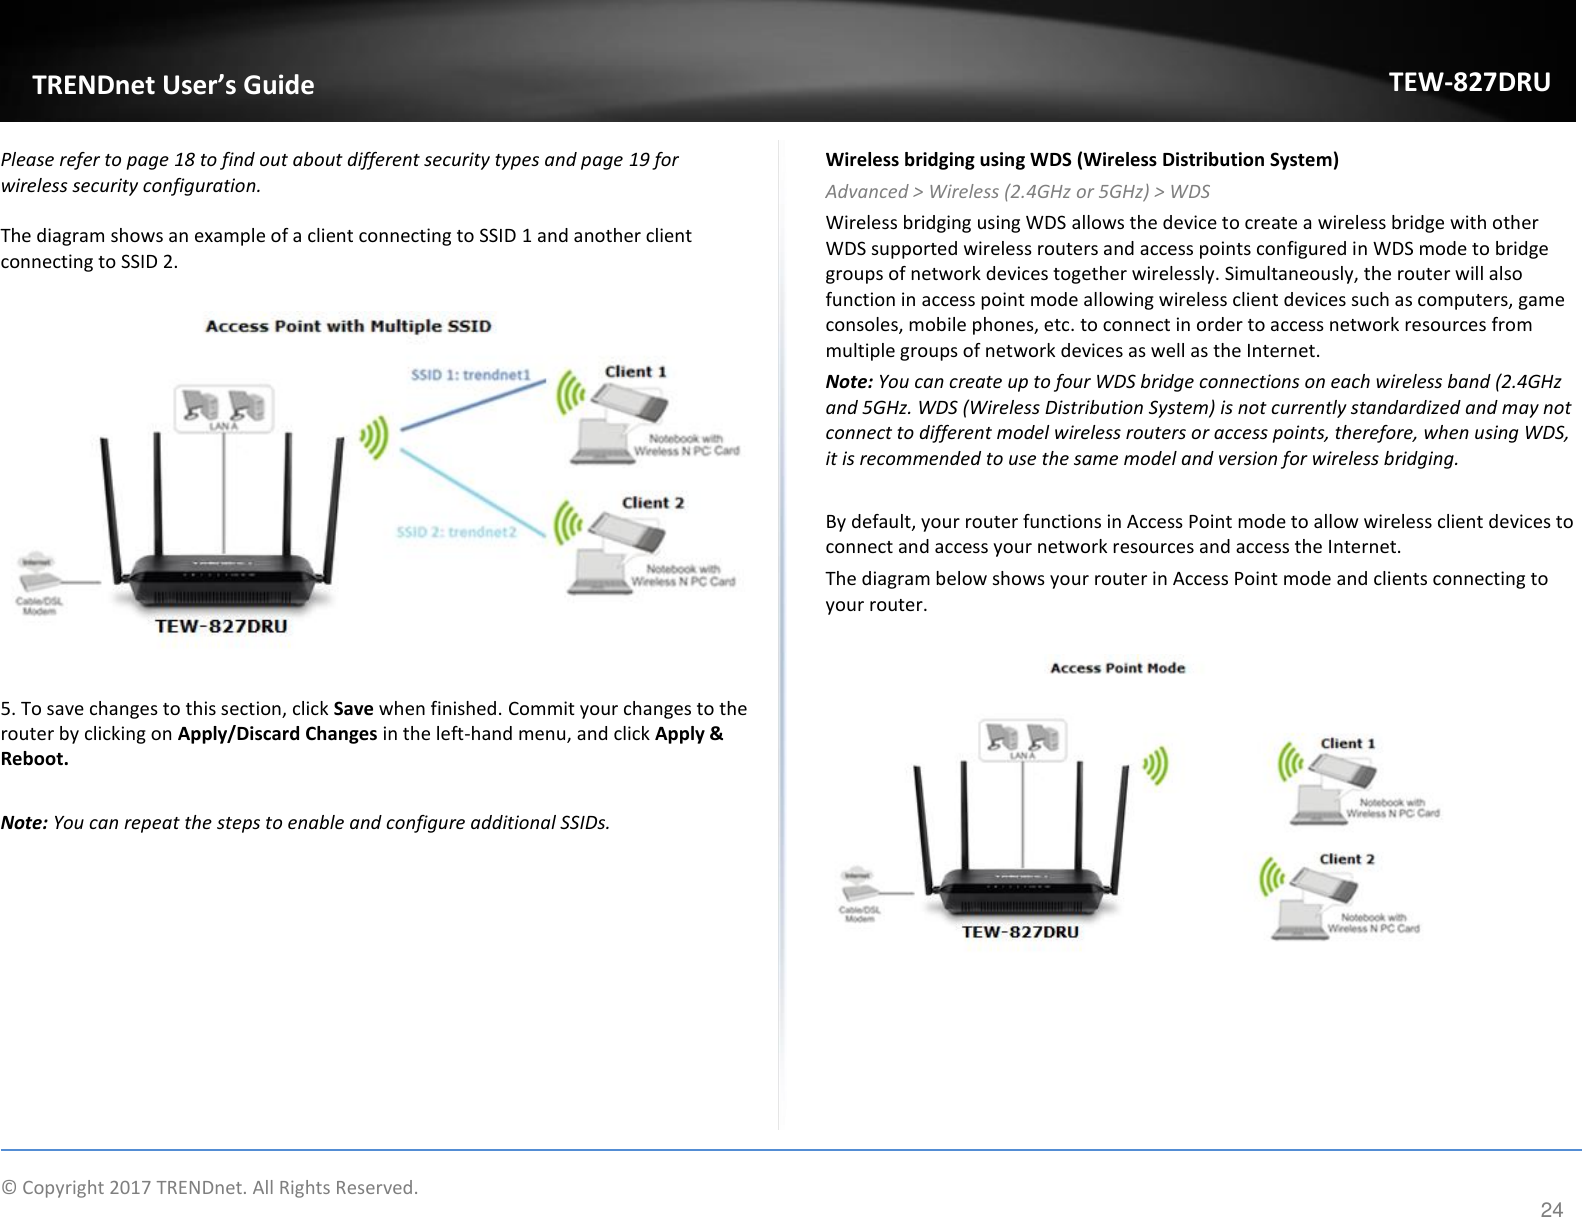             © Copyright 2017 TRENDnet. All Rights Reserved.       TRENDnet User’s Guide TEW-827DRU 24 Please refer to page 18 to find out about different security types and page 19 for wireless security configuration.  The diagram shows an example of a client connecting to SSID 1 and another client connecting to SSID 2.    5. To save changes to this section, click Save when finished. Commit your changes to the router by clicking on Apply/Discard Changes in the left-hand menu, and click Apply &amp; Reboot.  Note: You can repeat the steps to enable and configure additional SSIDs. Wireless bridging using WDS (Wireless Distribution System) Advanced &gt; Wireless (2.4GHz or 5GHz) &gt; WDS Wireless bridging using WDS allows the device to create a wireless bridge with other WDS supported wireless routers and access points configured in WDS mode to bridge groups of network devices together wirelessly. Simultaneously, the router will also function in access point mode allowing wireless client devices such as computers, game consoles, mobile phones, etc. to connect in order to access network resources from multiple groups of network devices as well as the Internet.  Note: You can create up to four WDS bridge connections on each wireless band (2.4GHz and 5GHz. WDS (Wireless Distribution System) is not currently standardized and may not connect to different model wireless routers or access points, therefore, when using WDS, it is recommended to use the same model and version for wireless bridging.  By default, your router functions in Access Point mode to allow wireless client devices to connect and access your network resources and access the Internet. The diagram below shows your router in Access Point mode and clients connecting to your router.        